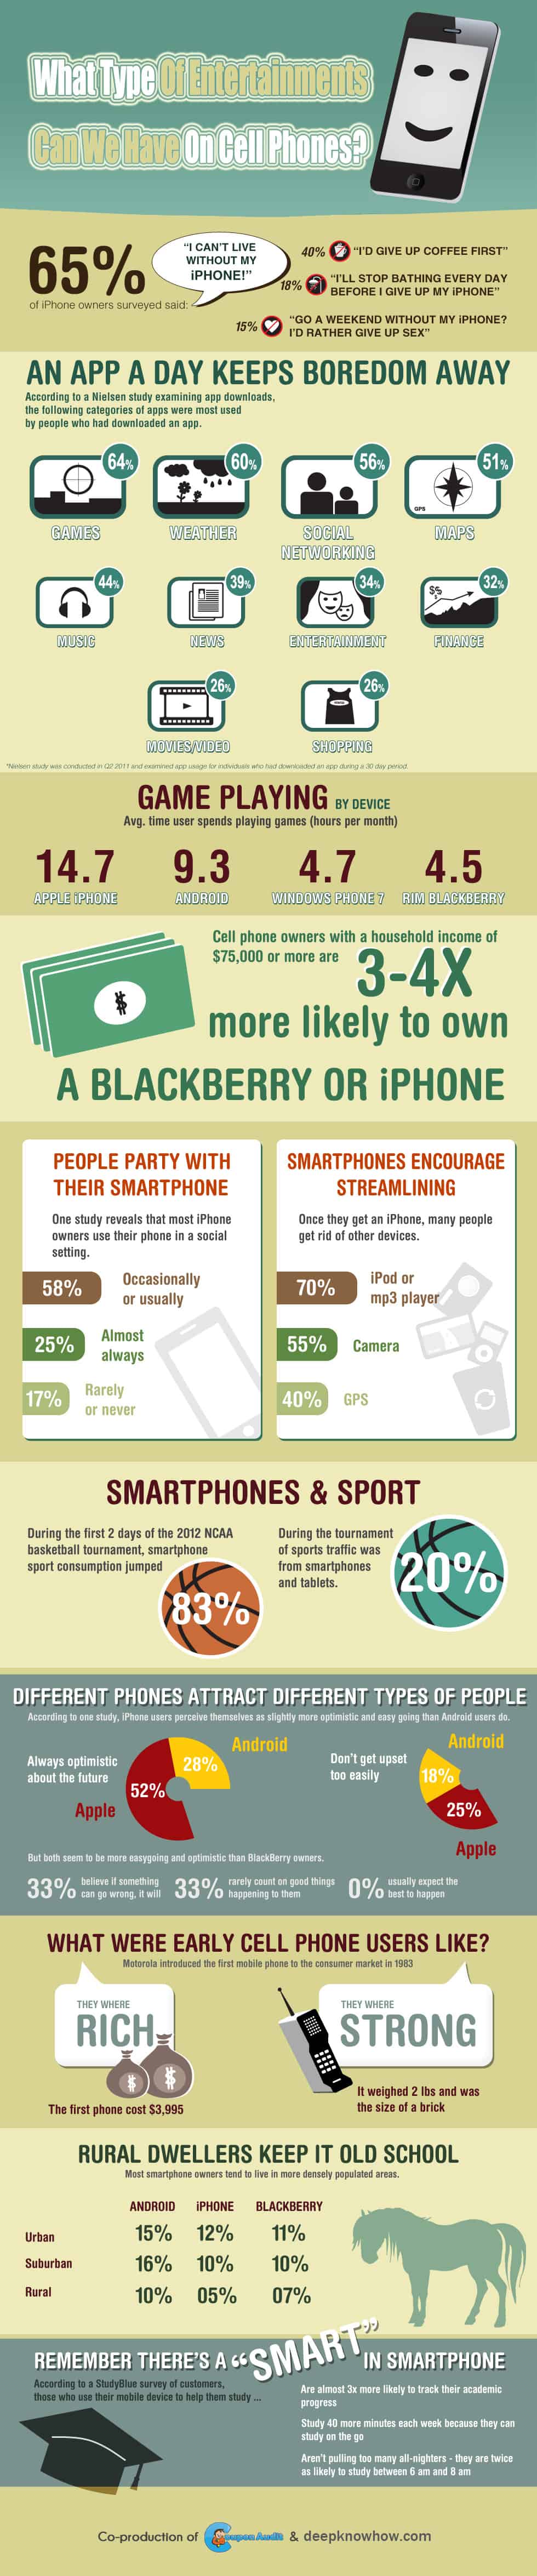 Types Of Entertainments on Cell Phones [Infographic]